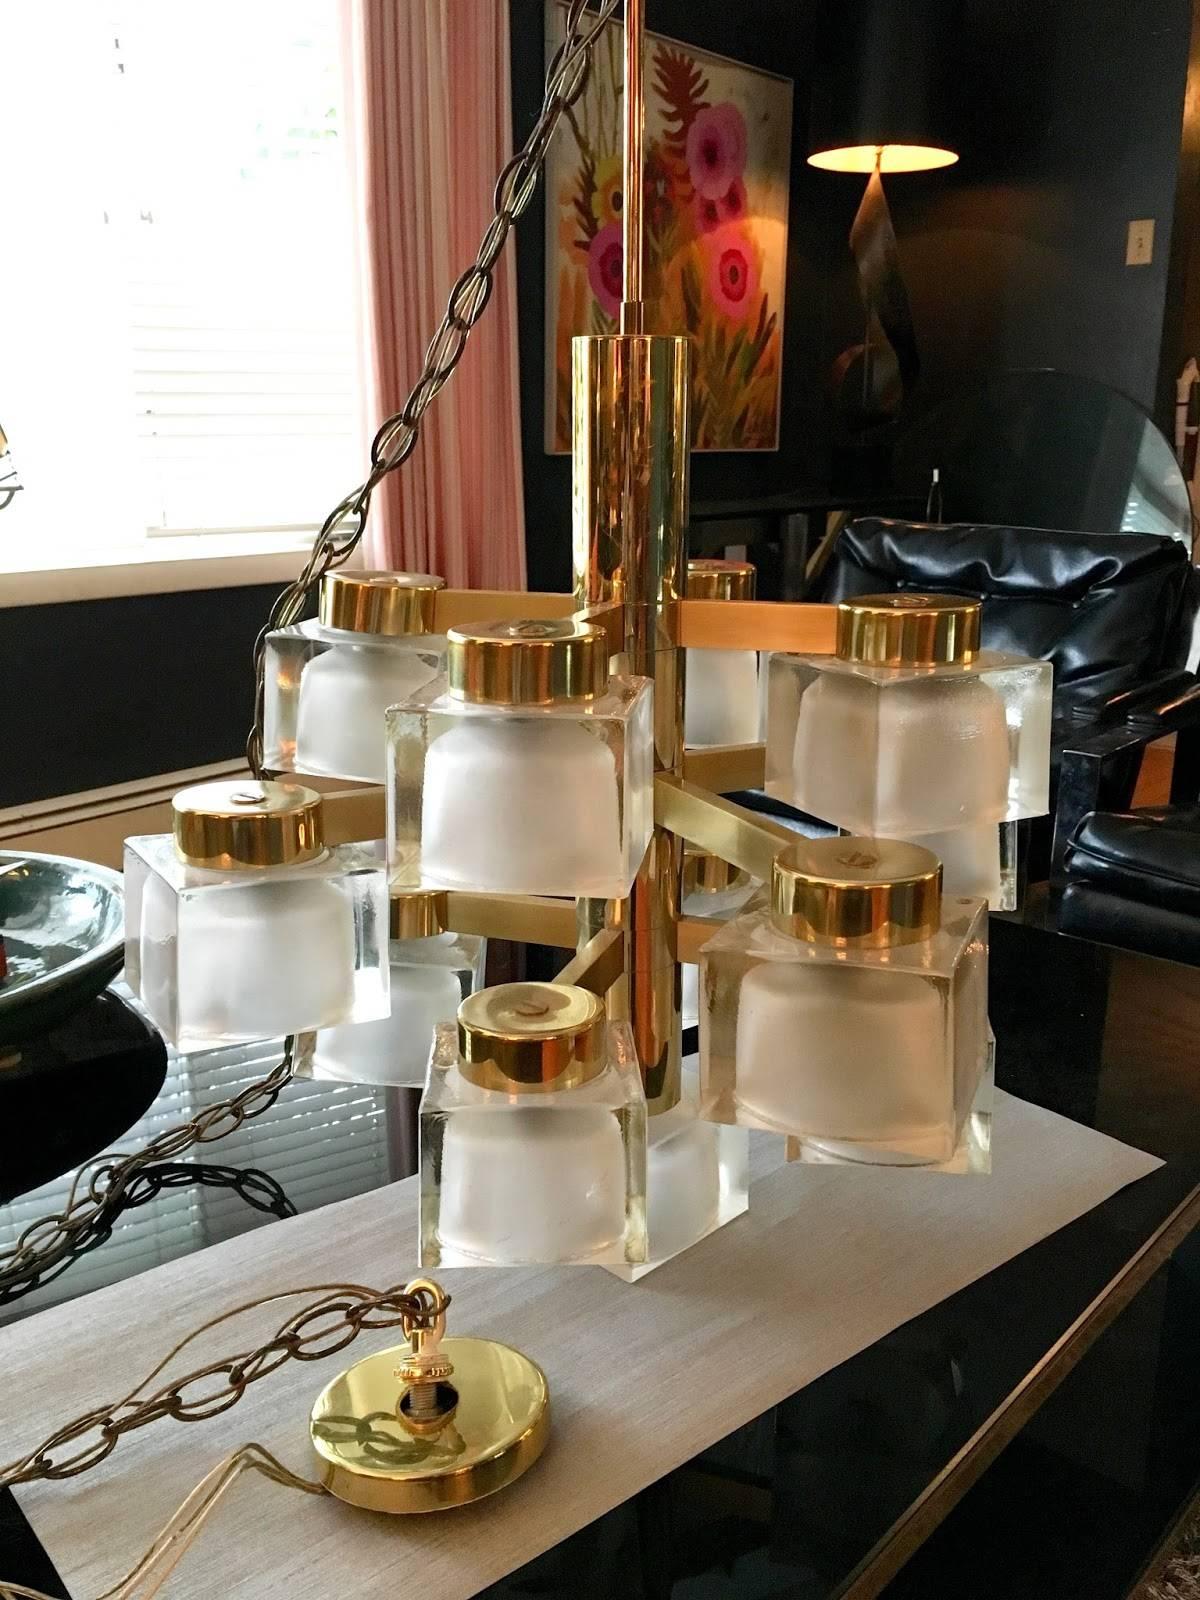 Excellent frosted cube chandelier by Gaetano Sciolari for Lightolier.
This piece is in excellent condition with no chips or breaks to any of the 13 frosted cubes.
This chandelier is also substantial in weight and the quality is amazing!
Hard to